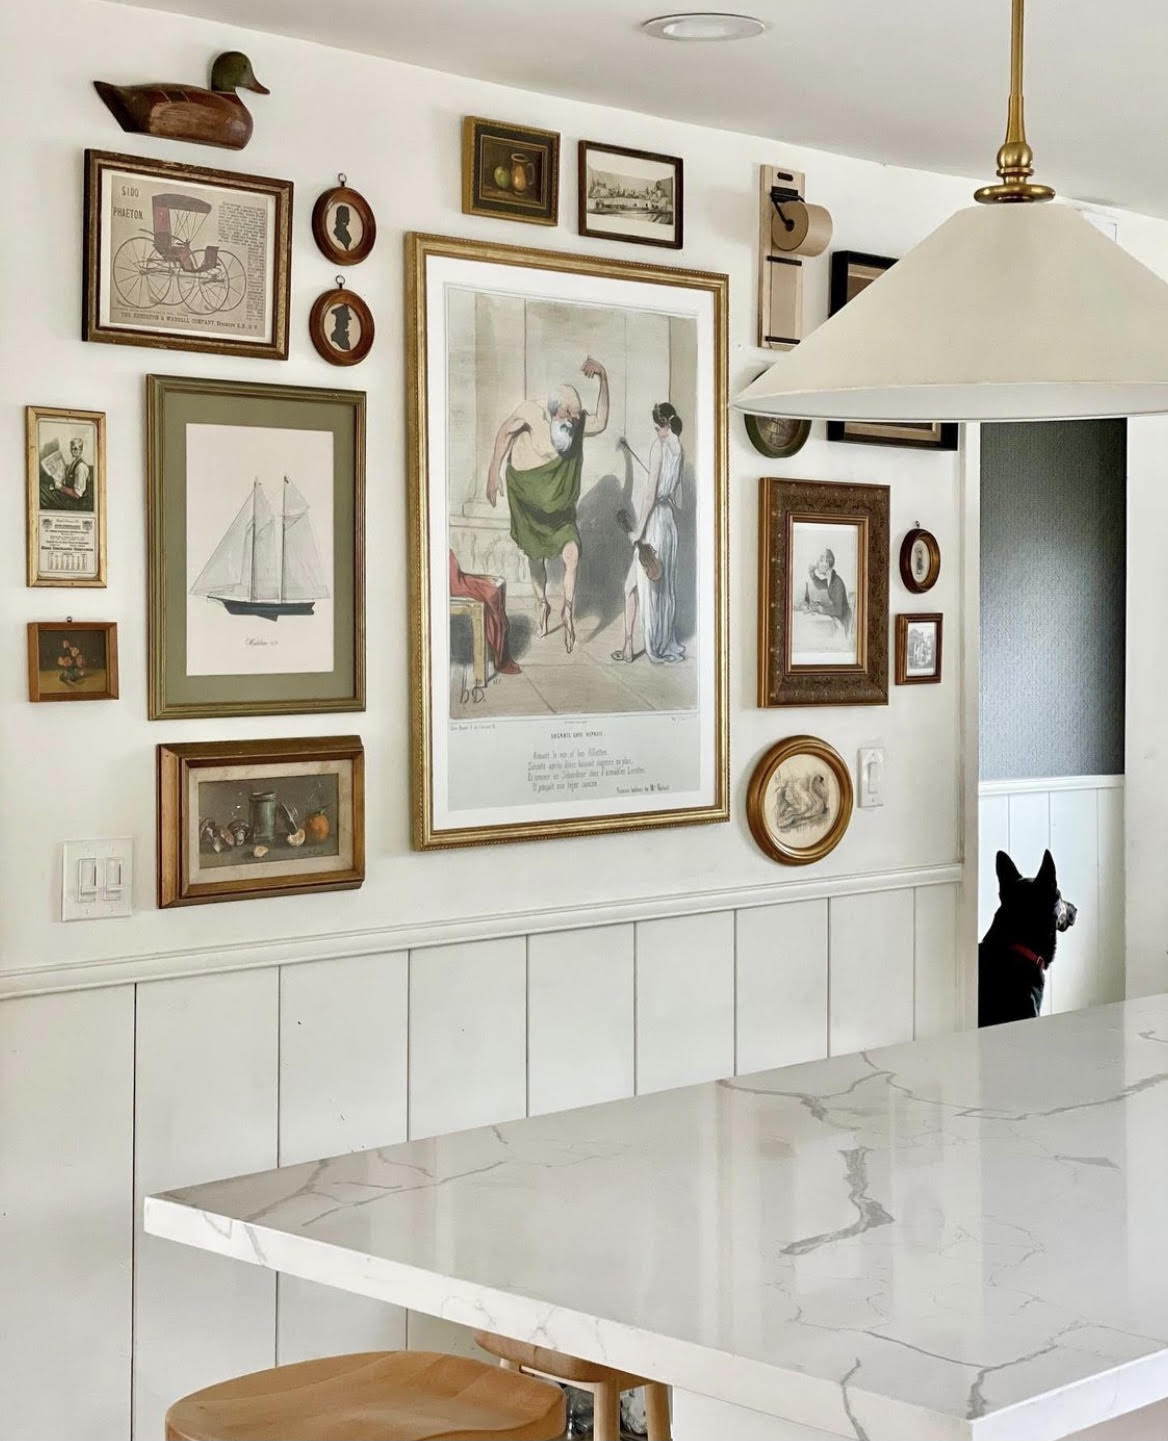 Kitchen gallery wall, kitchen pendant, swiss coffee wall paint, art in kitchen, thrifted art, modern traditional home, shiplap wainscoting, calacatta laza quartz countertops, 1950 beach house, pretty on fridays, modern vintage, thrifted home, displaying art in unexpected places